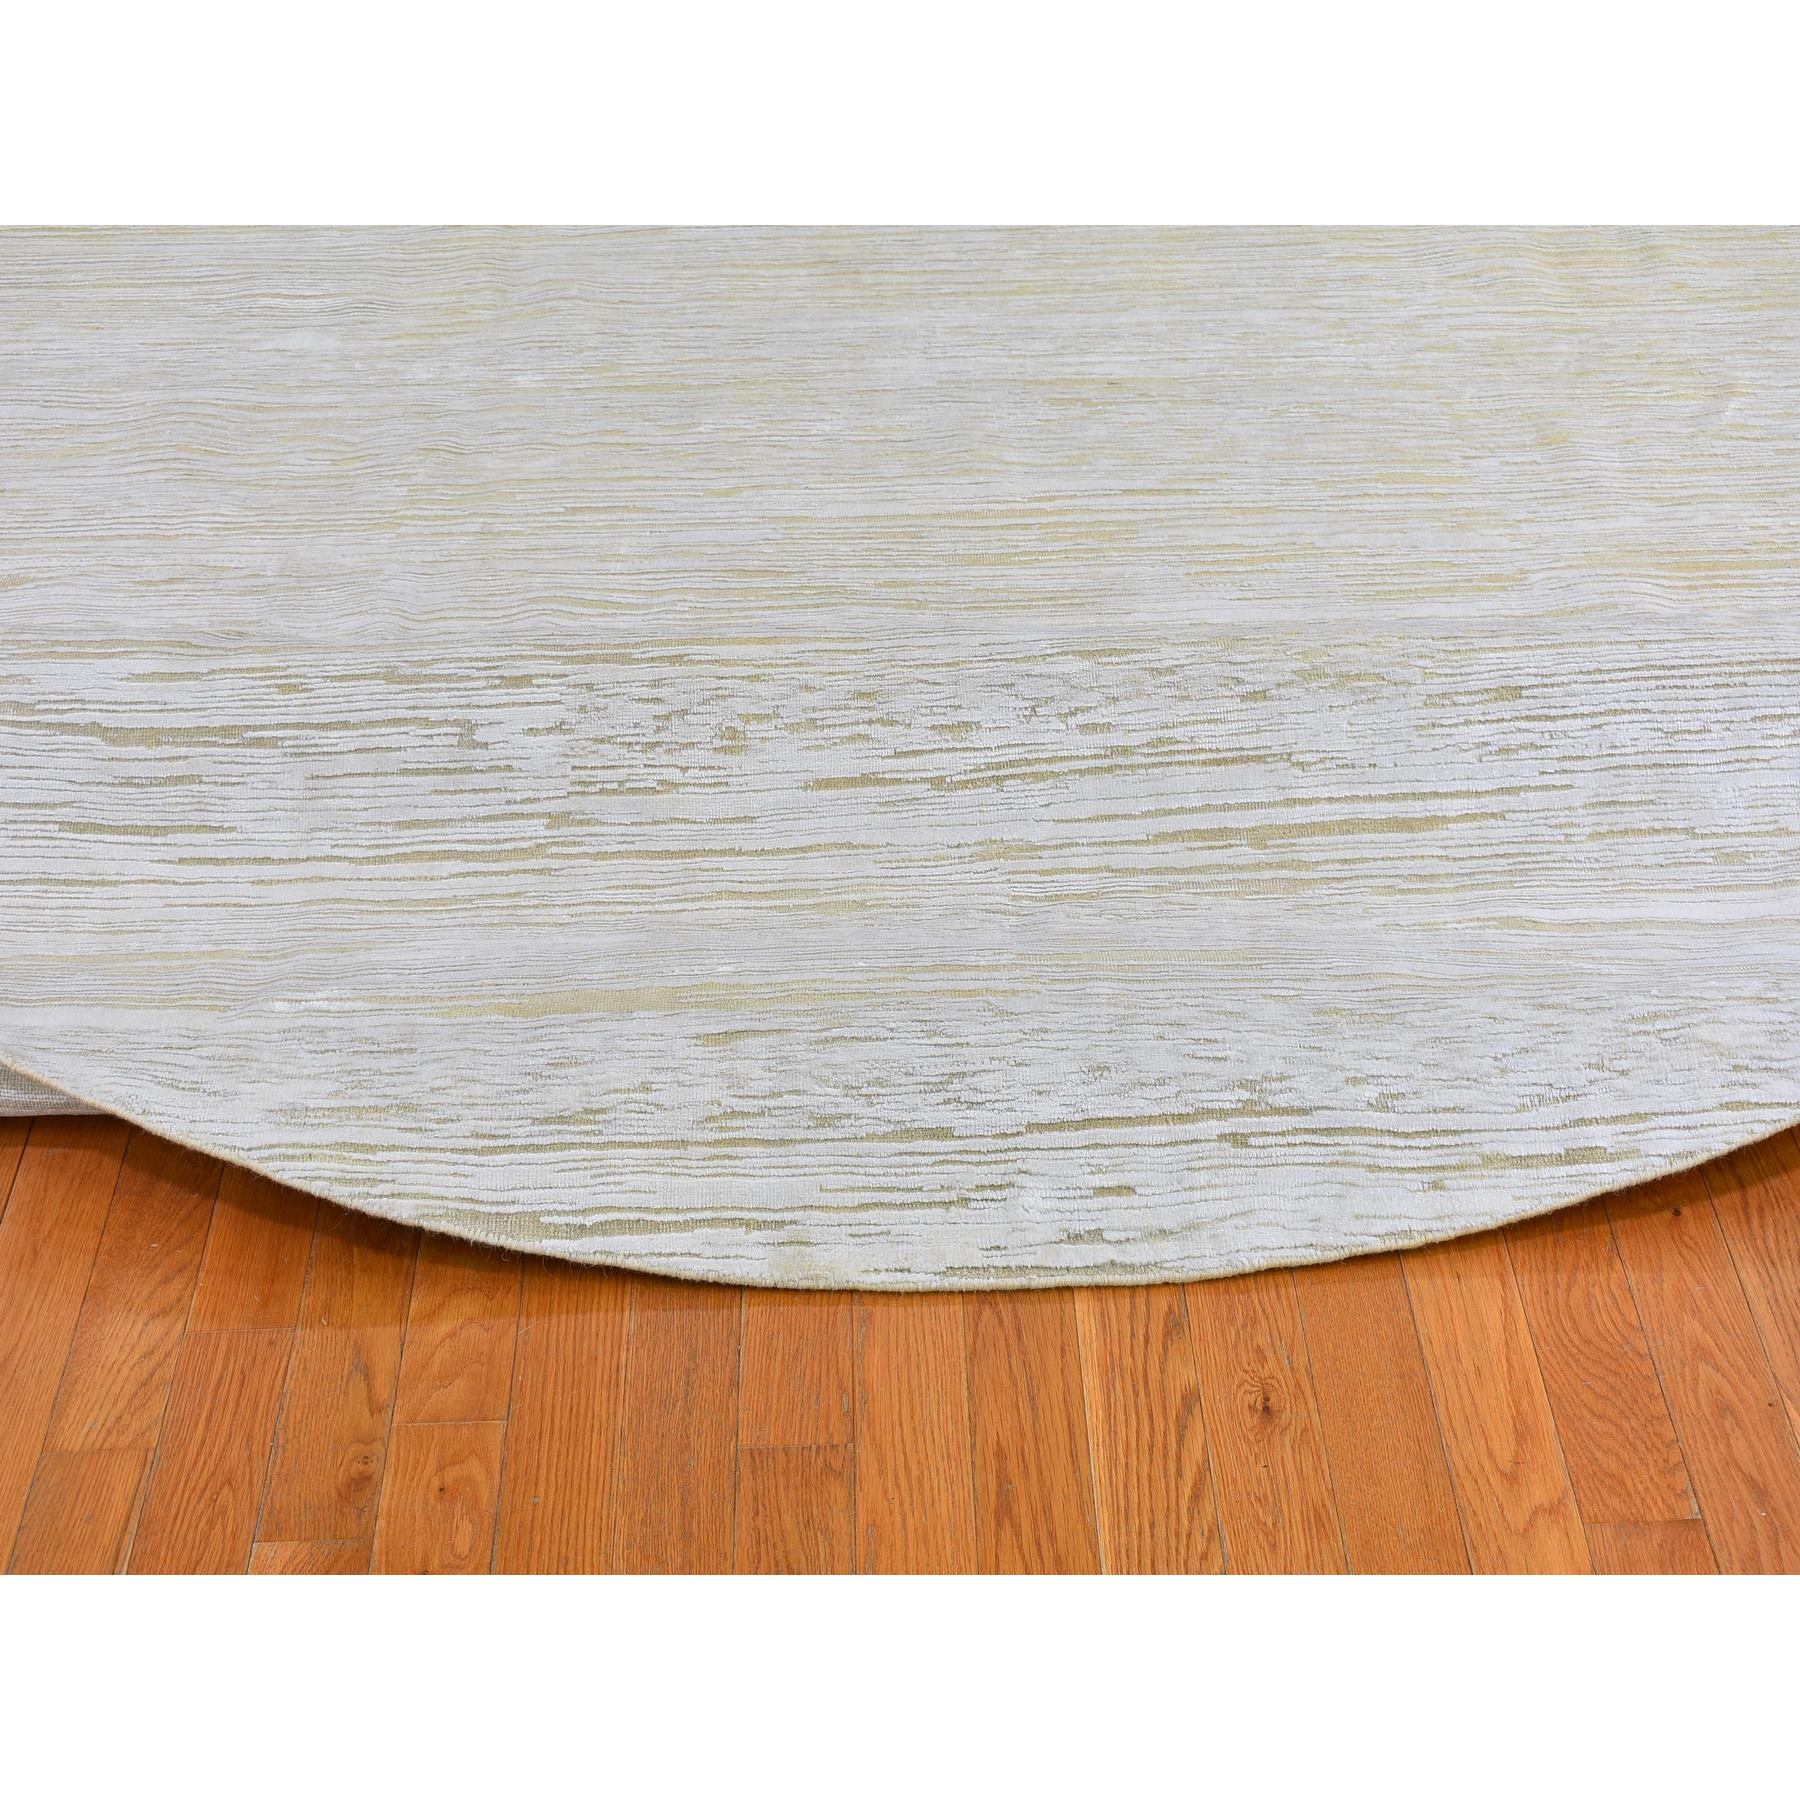 12'x12' Gabbeh Design Hand Woven Ivory Silk with Textured Wool Tone on Tone Hi-Low Pile Round Oriental Rug 